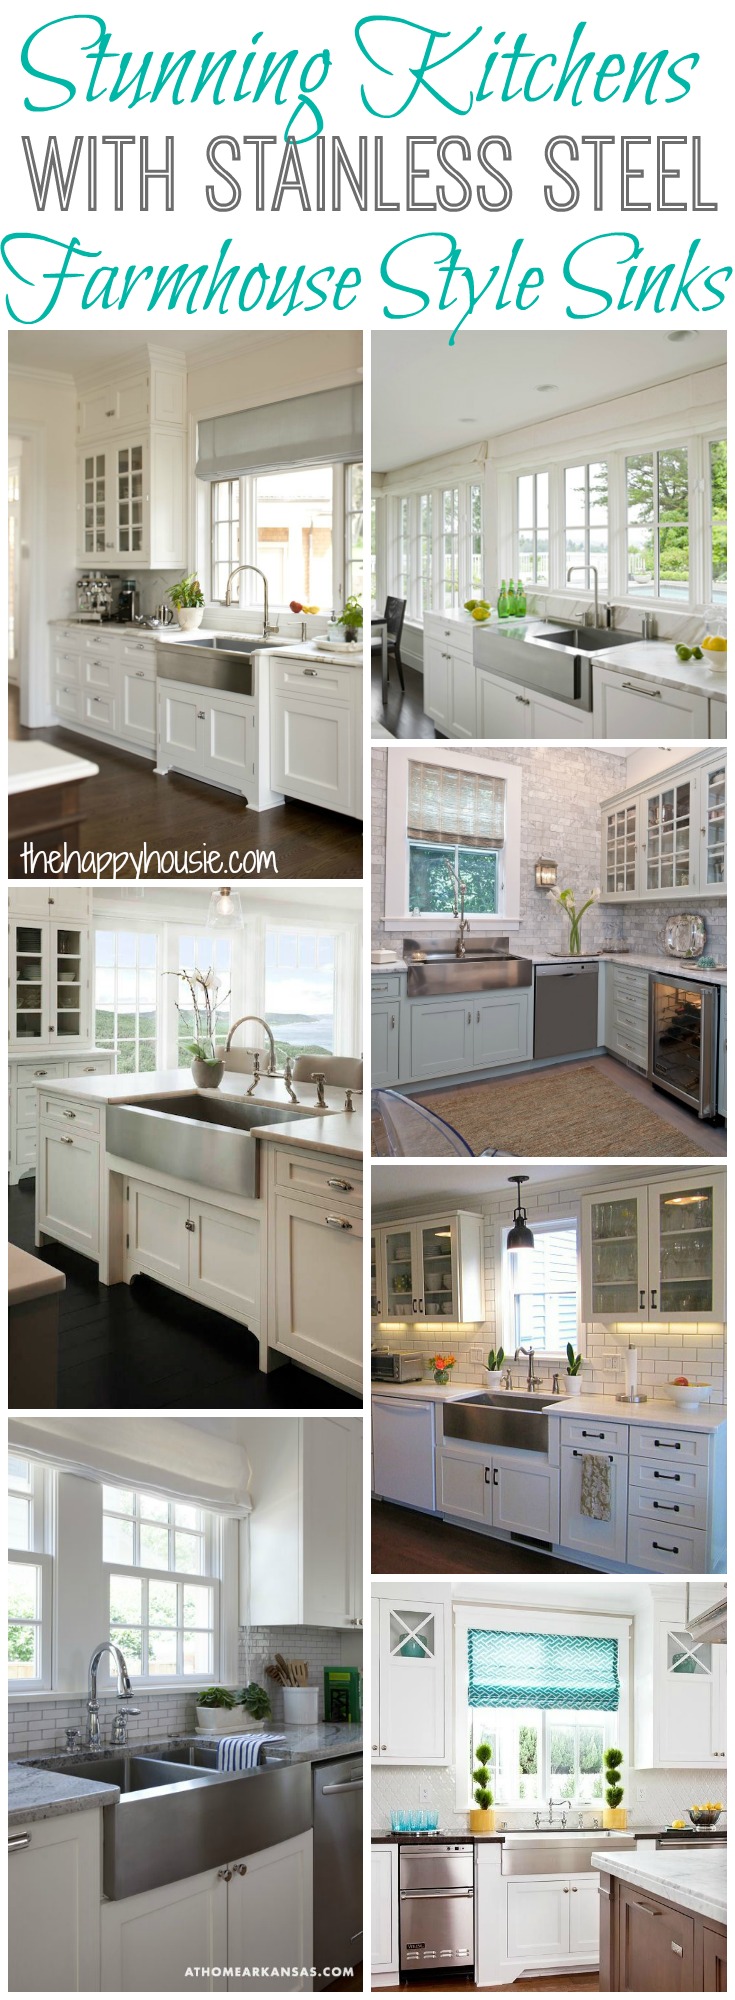 Stunning Kitchens with Stainless Steel Farmhouse Style Sinks at thehappyhousie.com graphic.